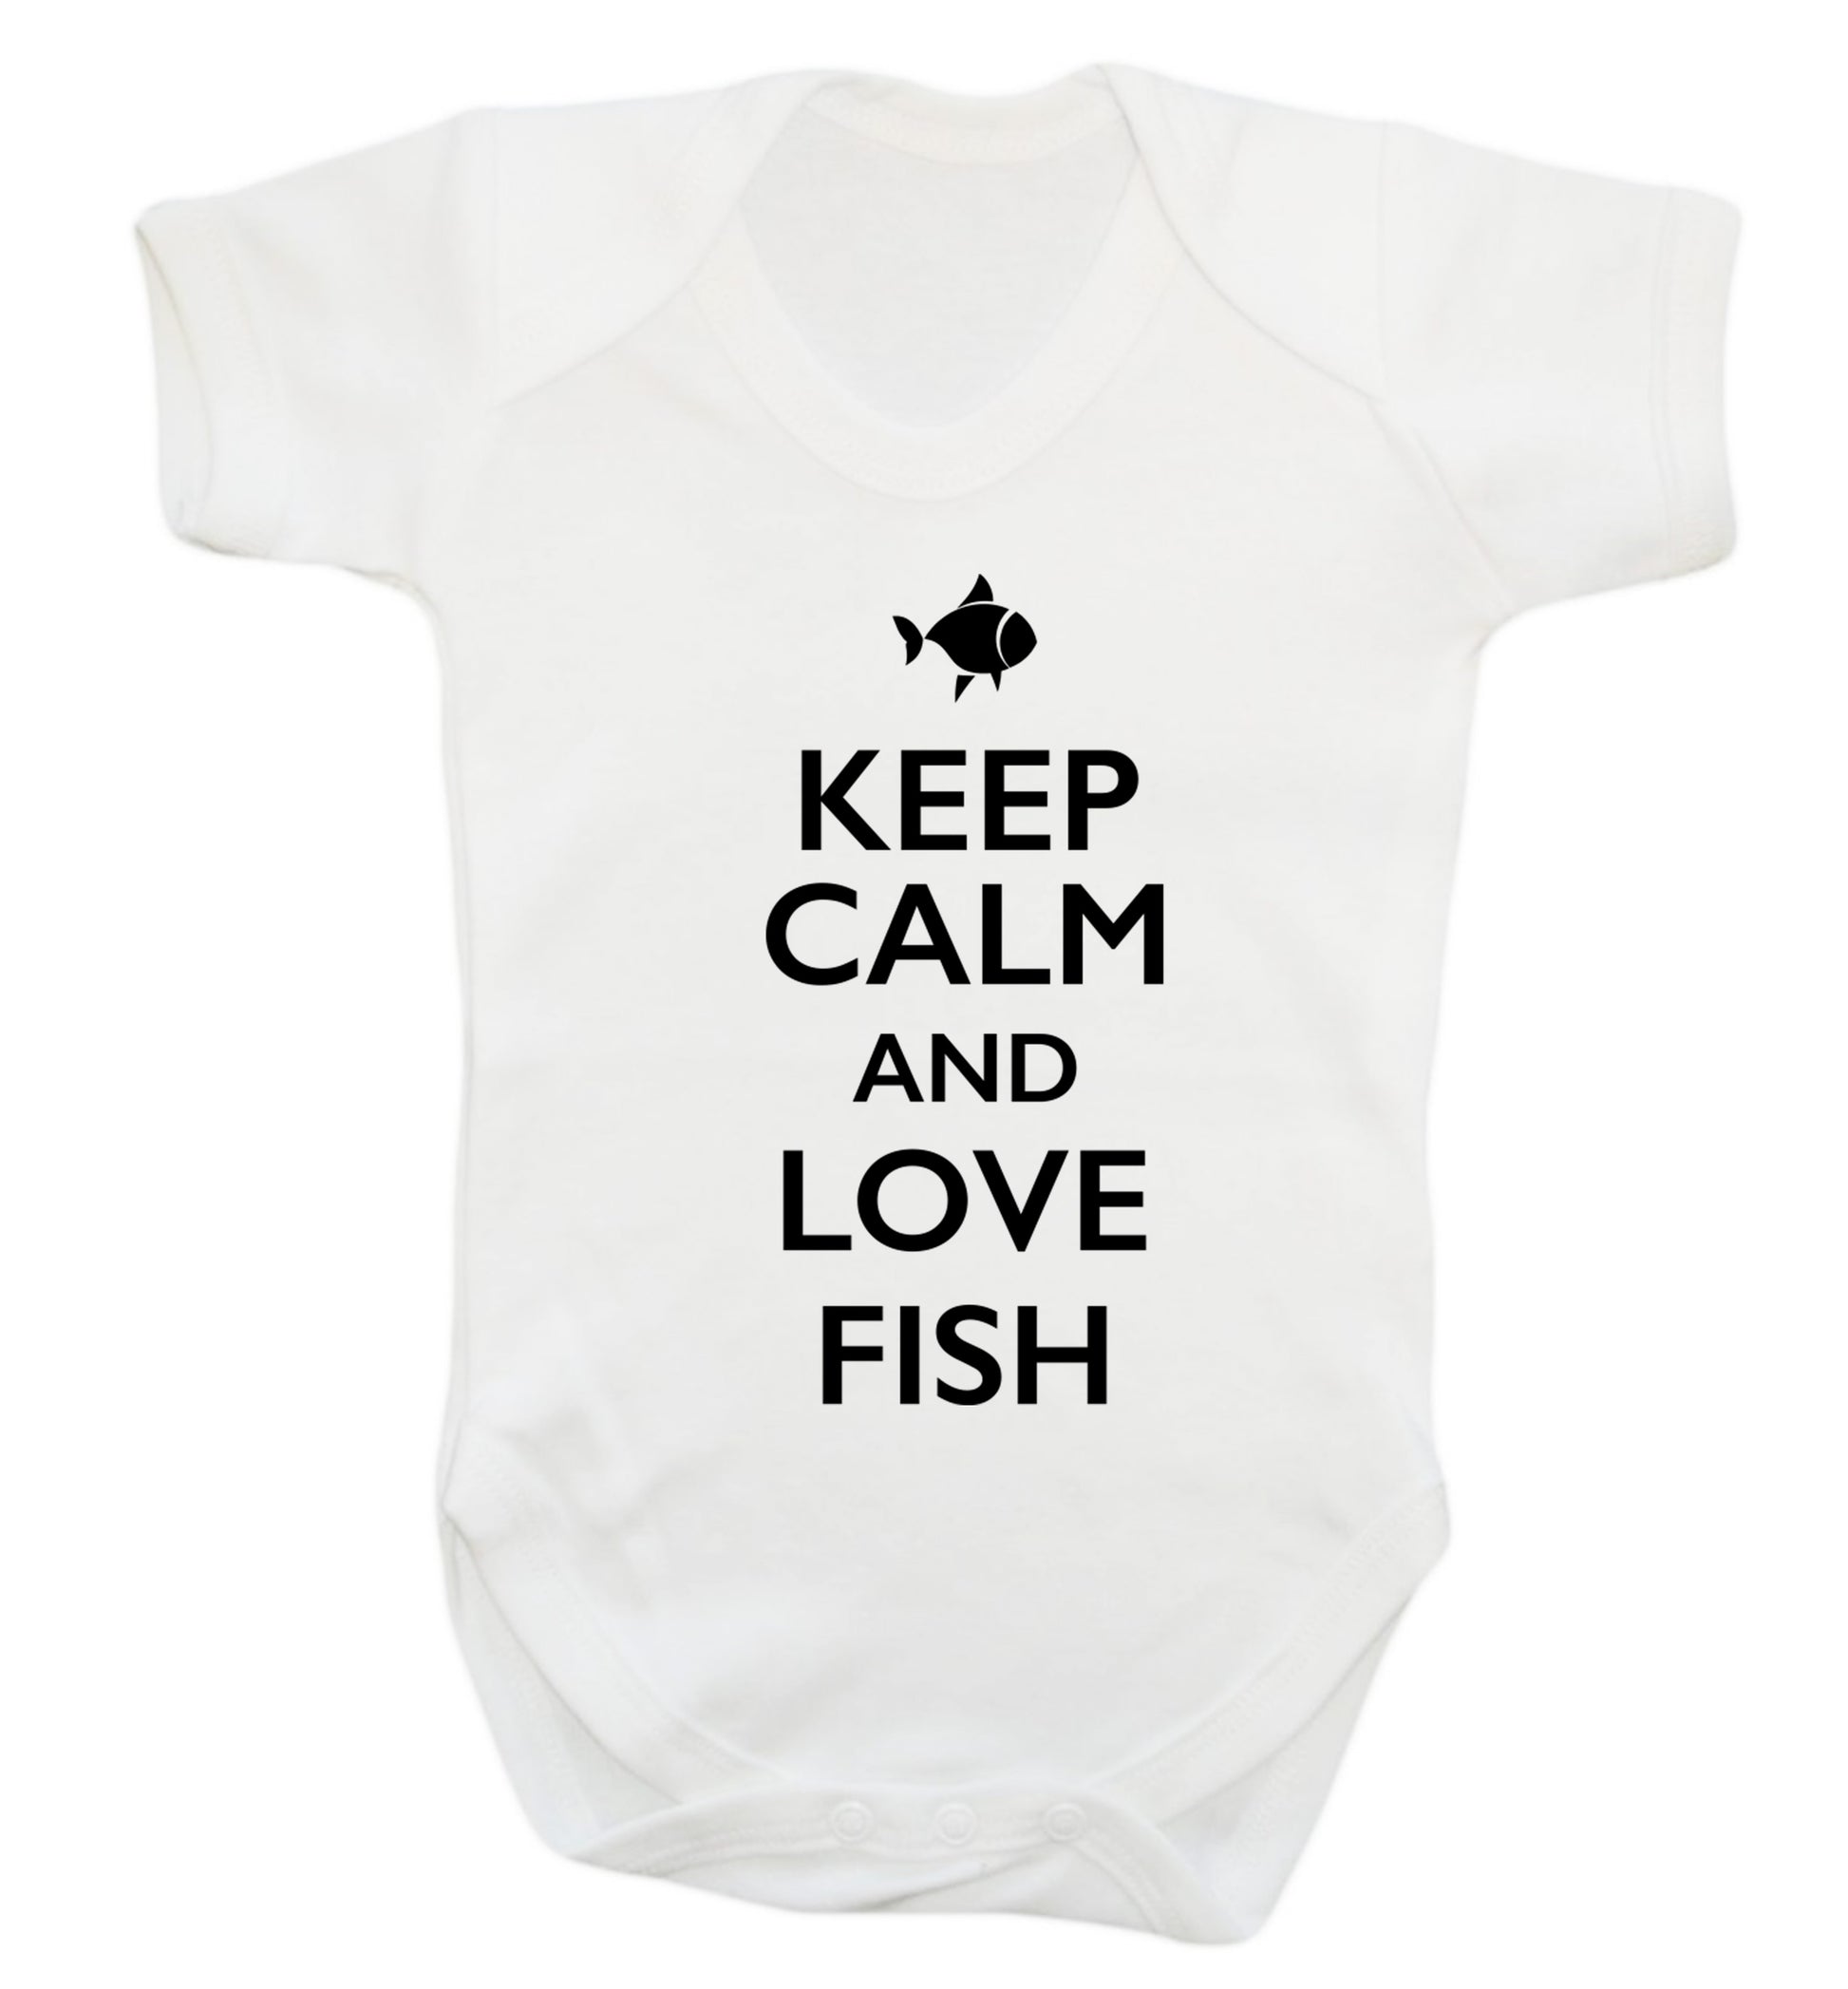 Keep calm and love fish Baby Vest white 18-24 months